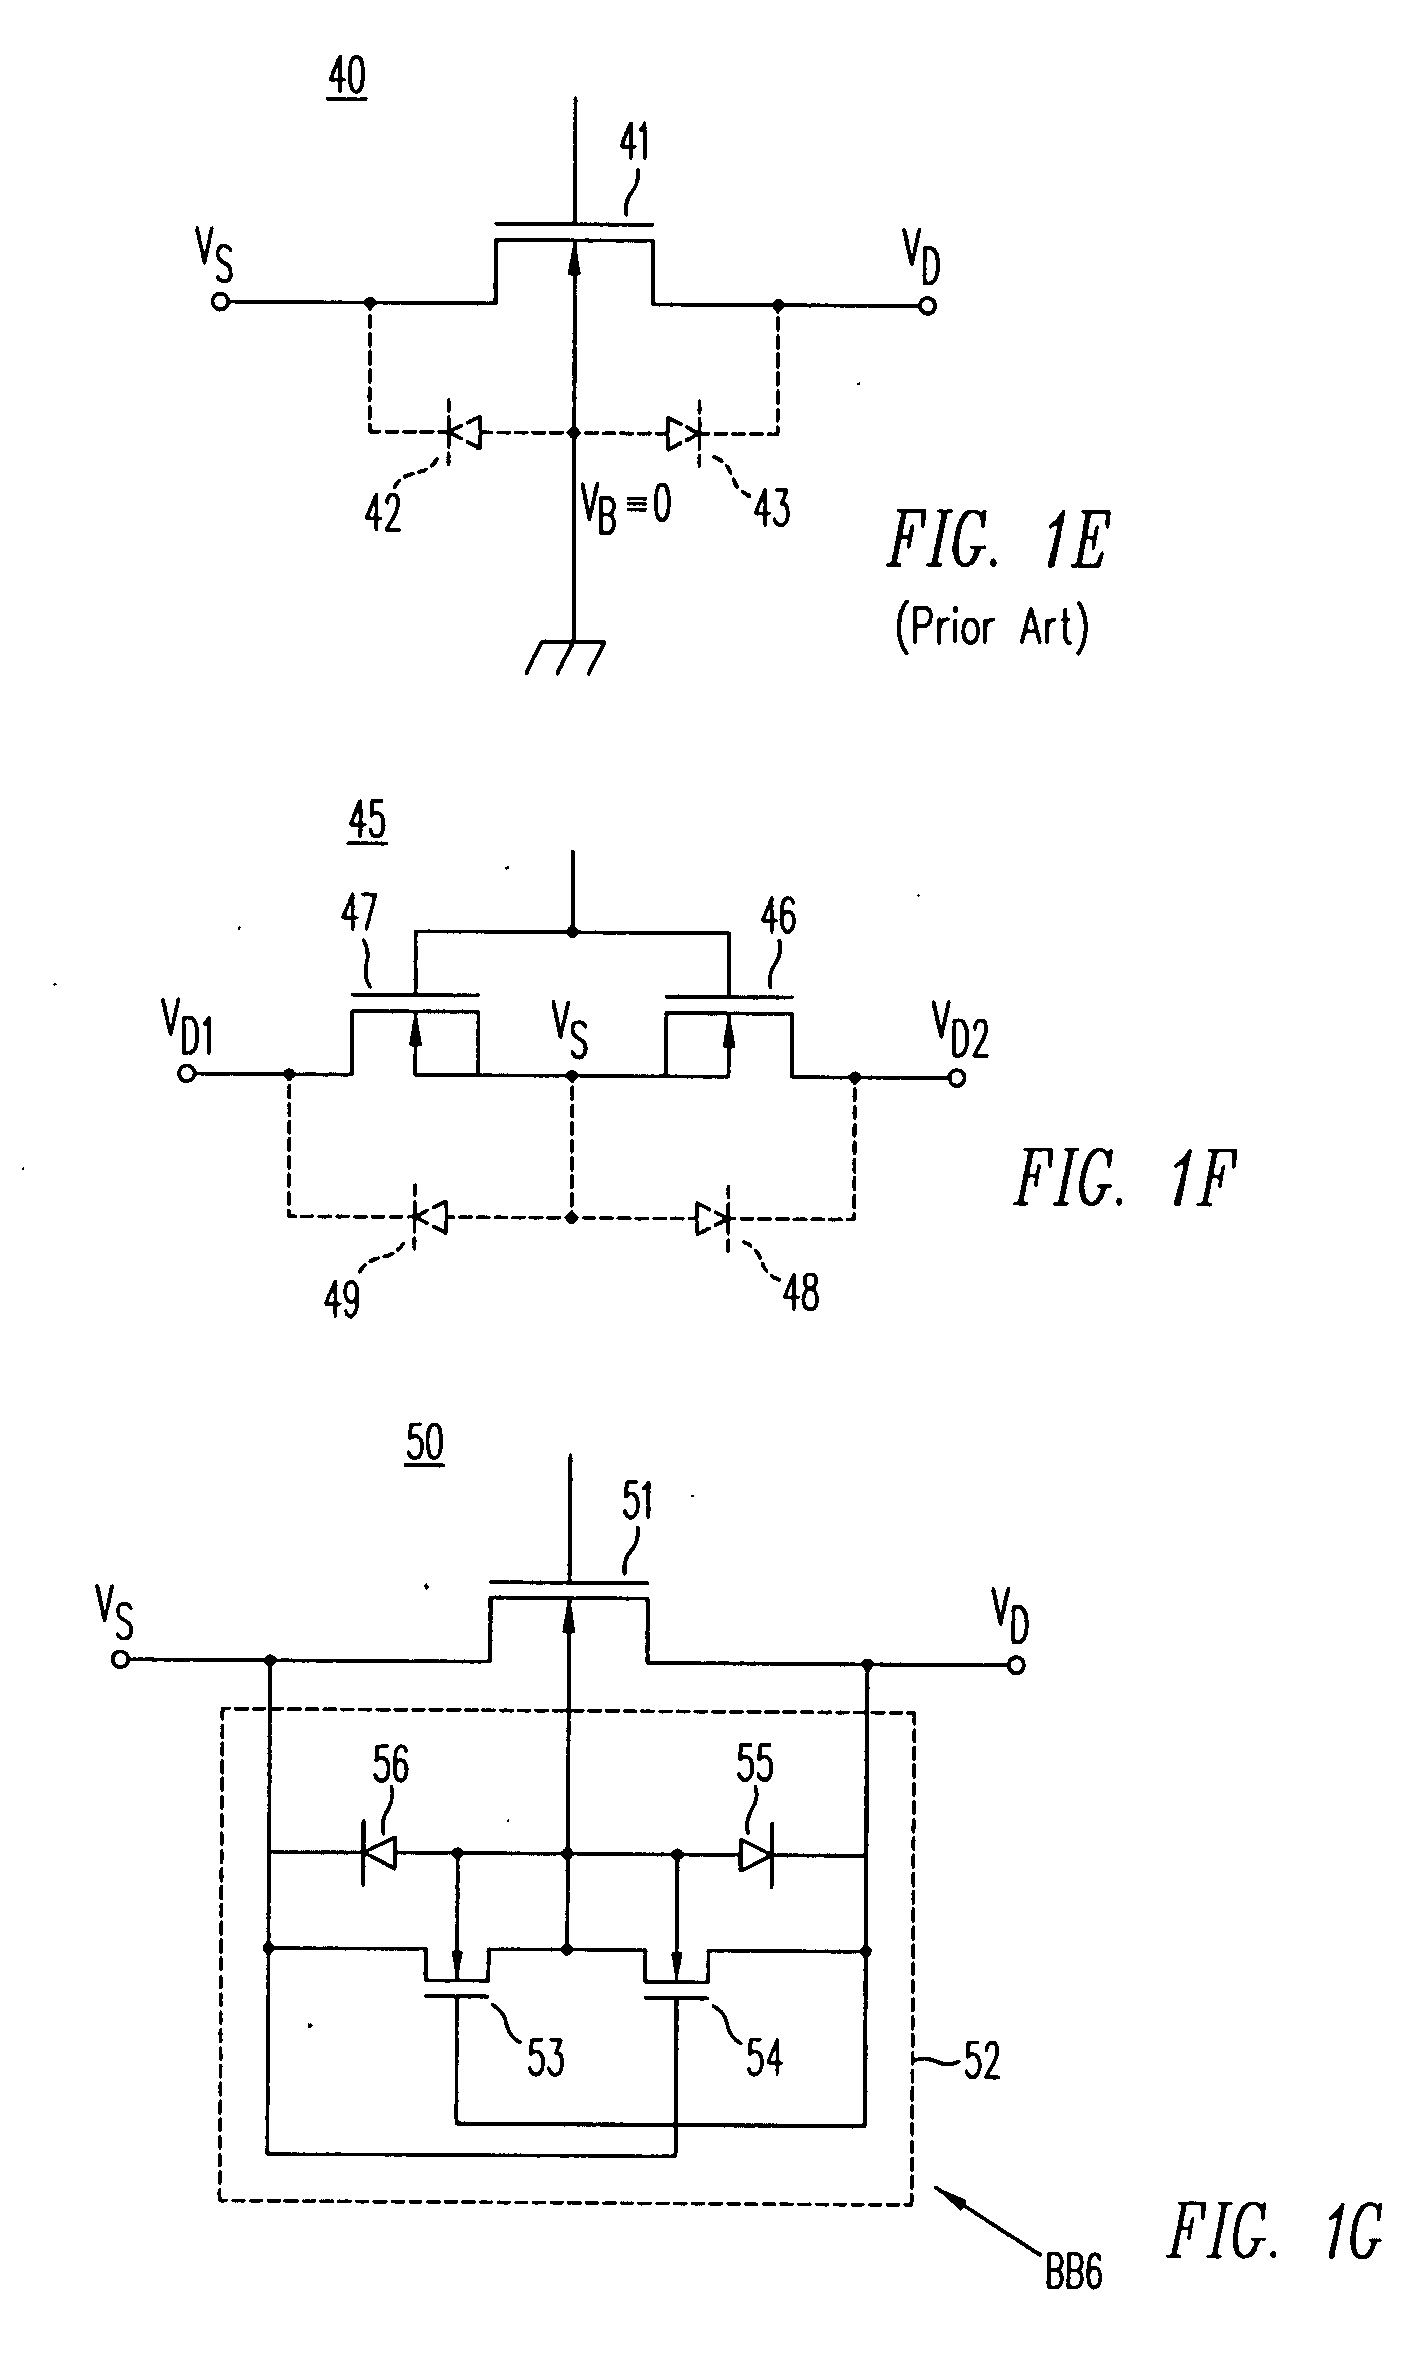 High-voltage bipolar-CMOS-DMOS integrated circuit devices and modular methods of forming the same